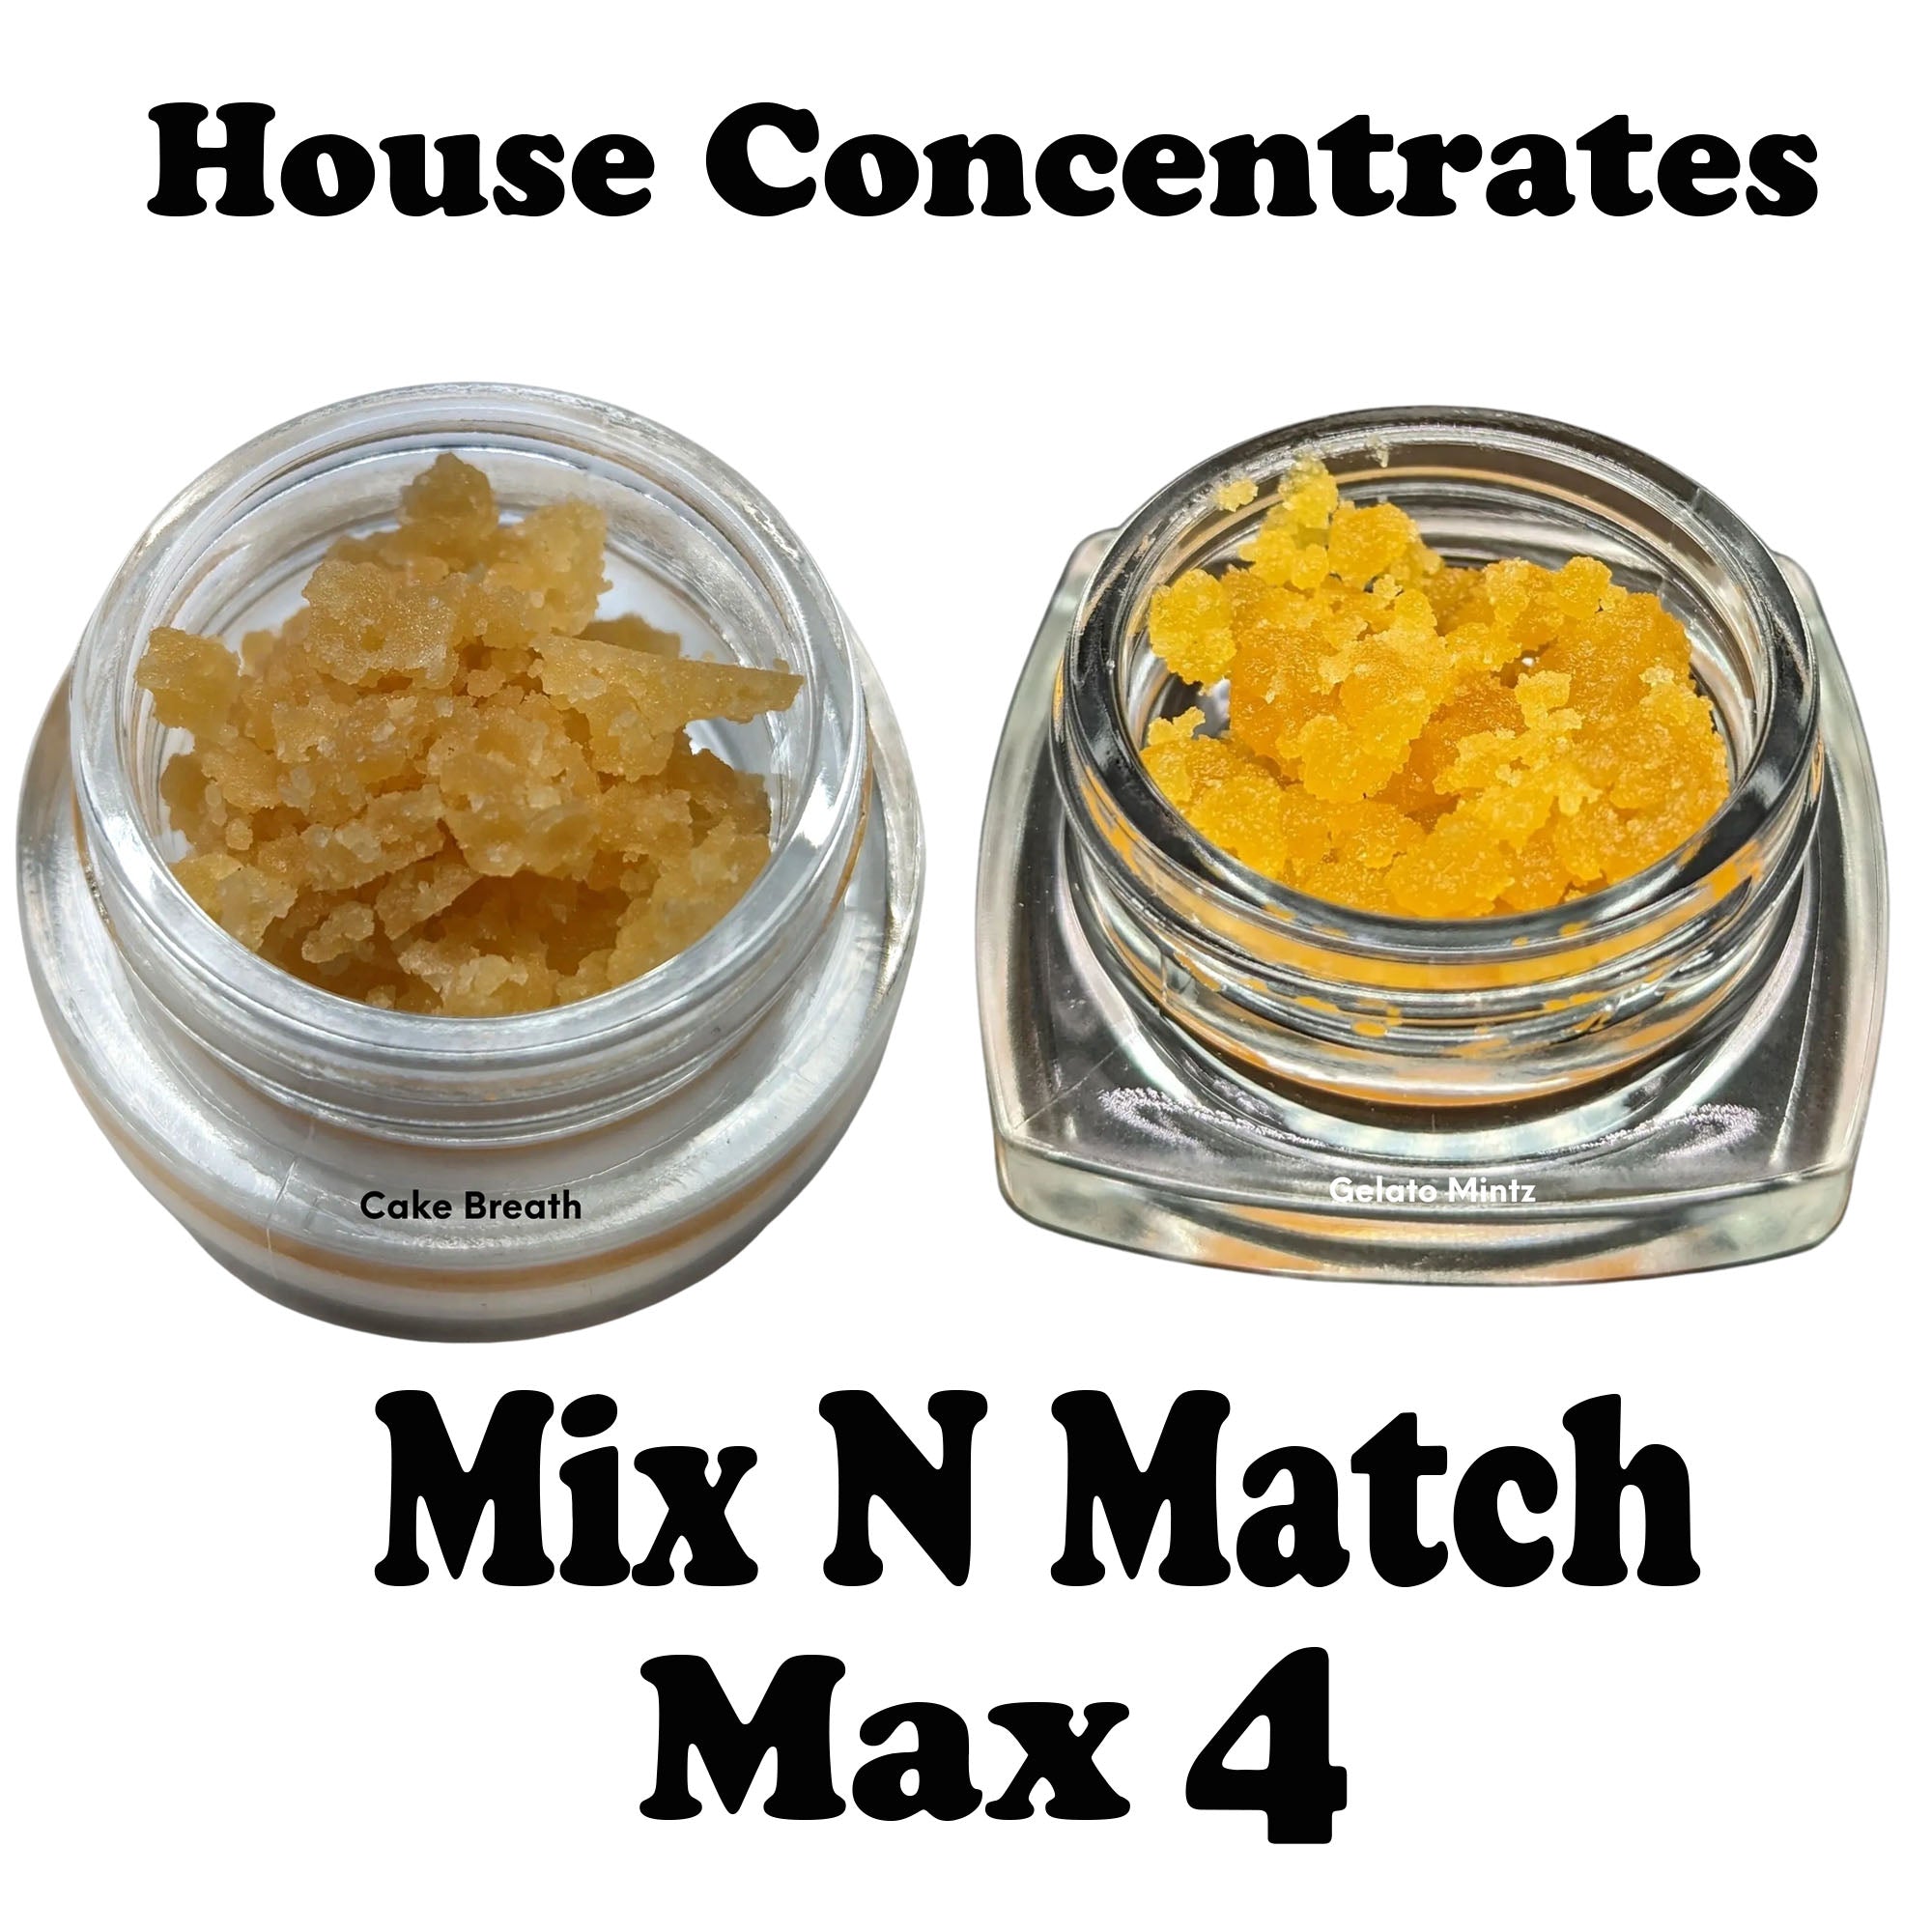 House Concentrates Mix N Match